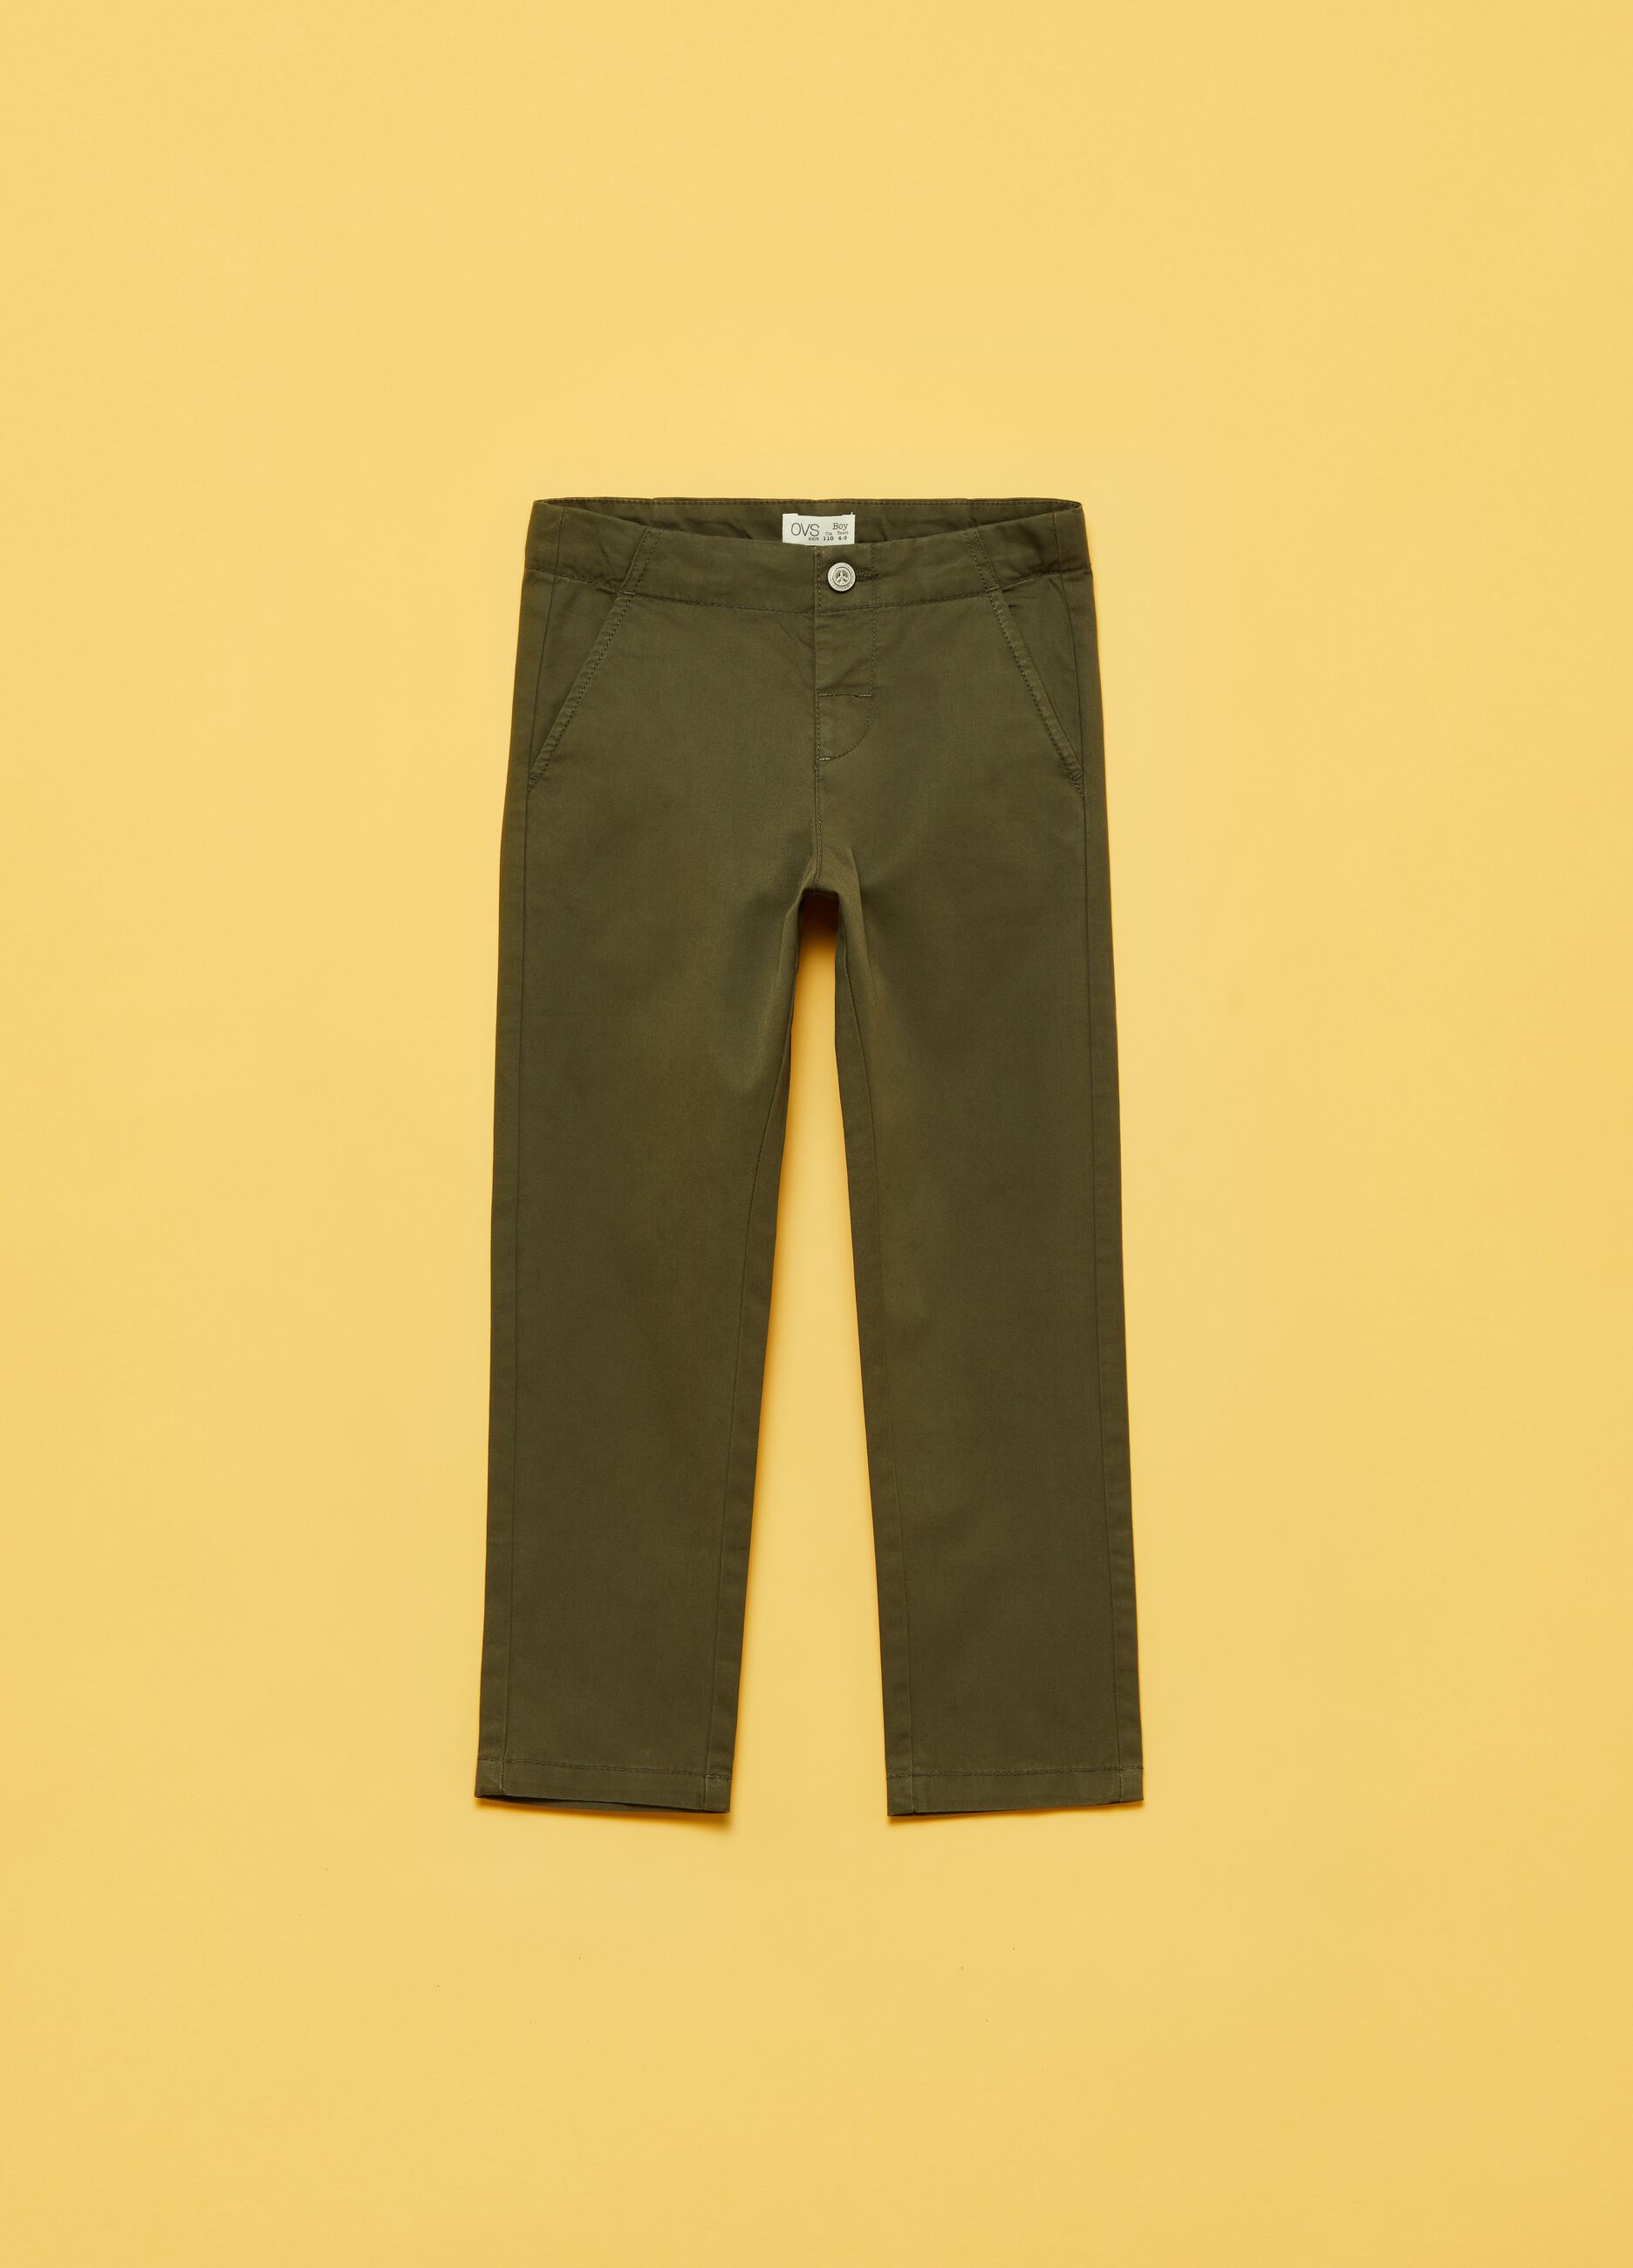 Trousers in cotton twill